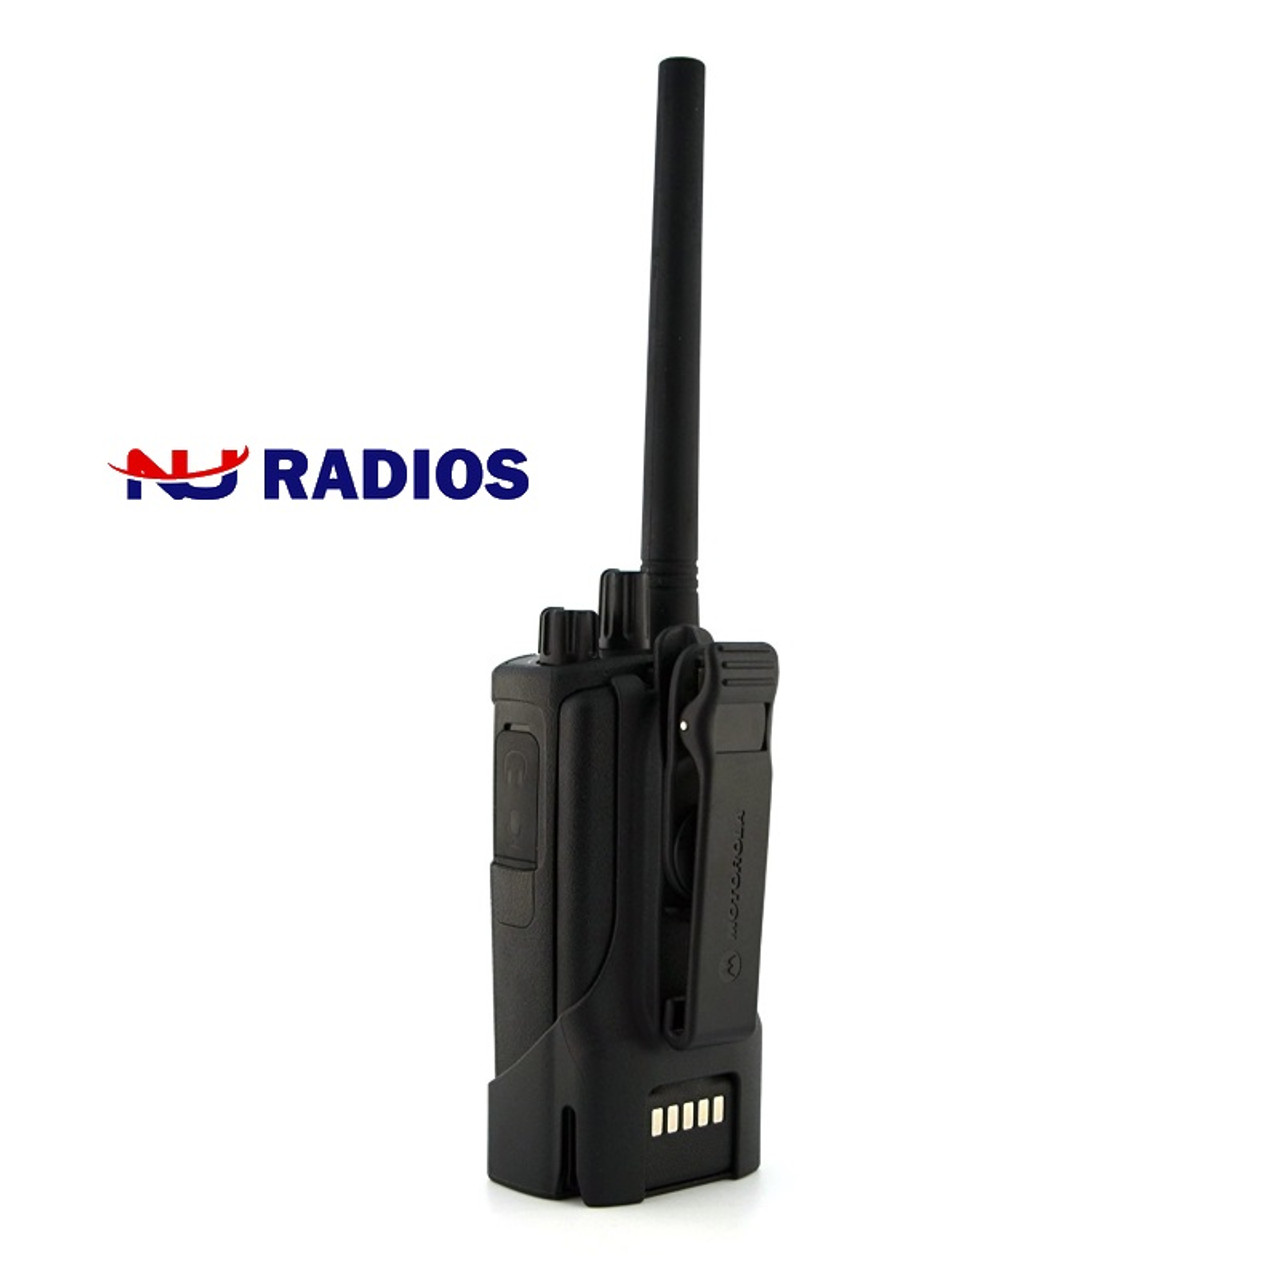 No FCC License required on this Six Pack of VHF outdoor Motorola RMM2050  Watt MURS Business Radios that work great outdoors.